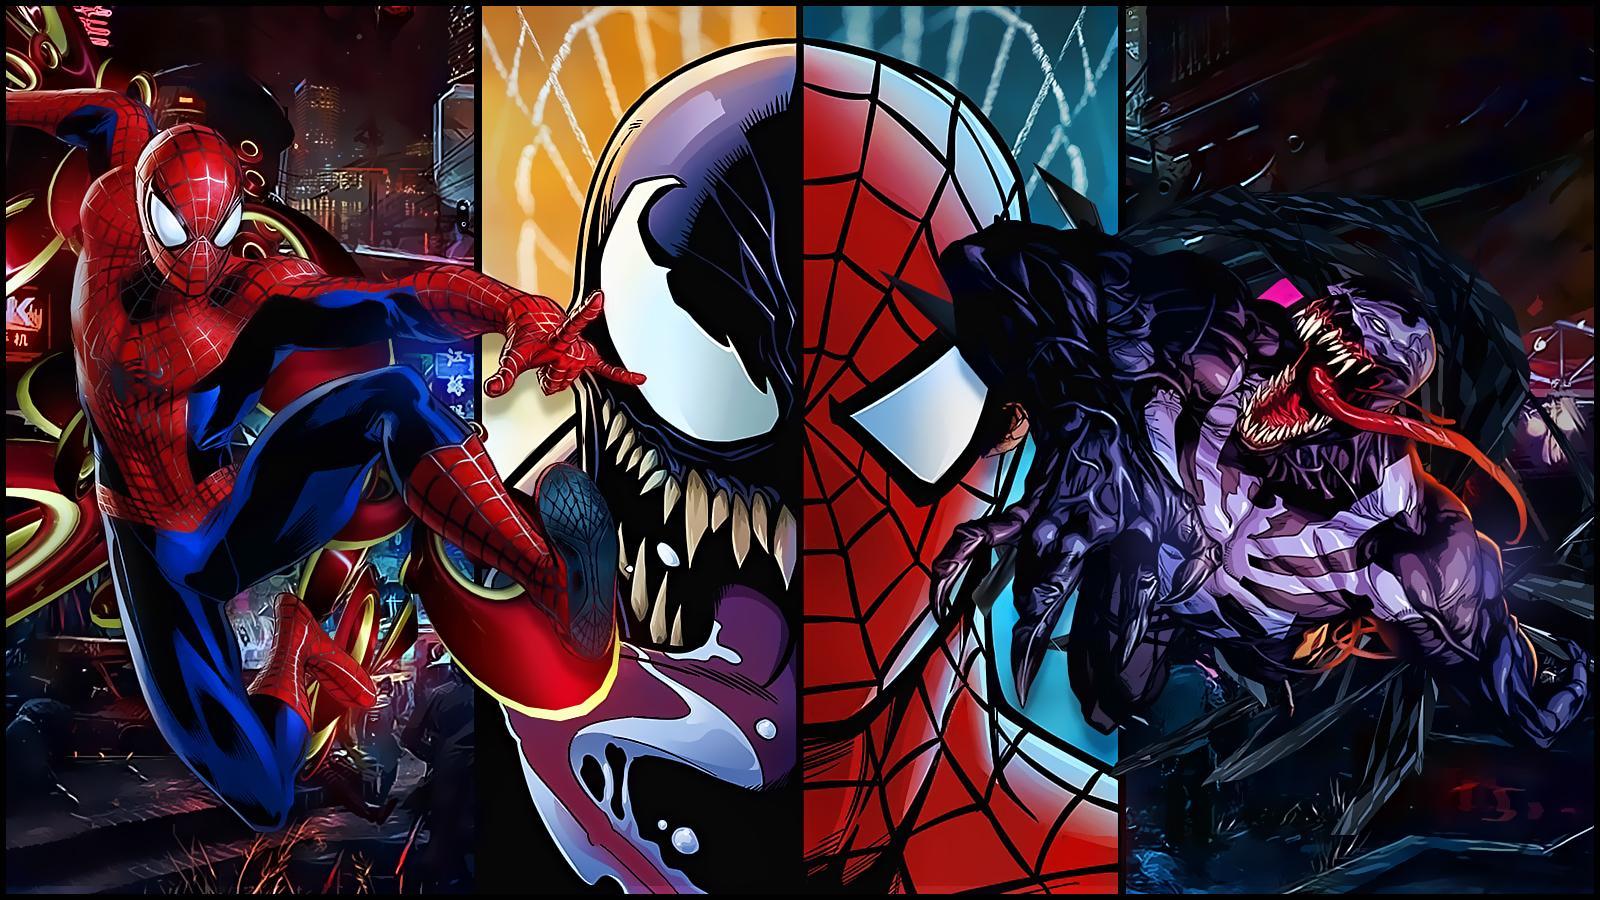 Download Spiderman And Venom Wallpaper, HD Backgrounds.